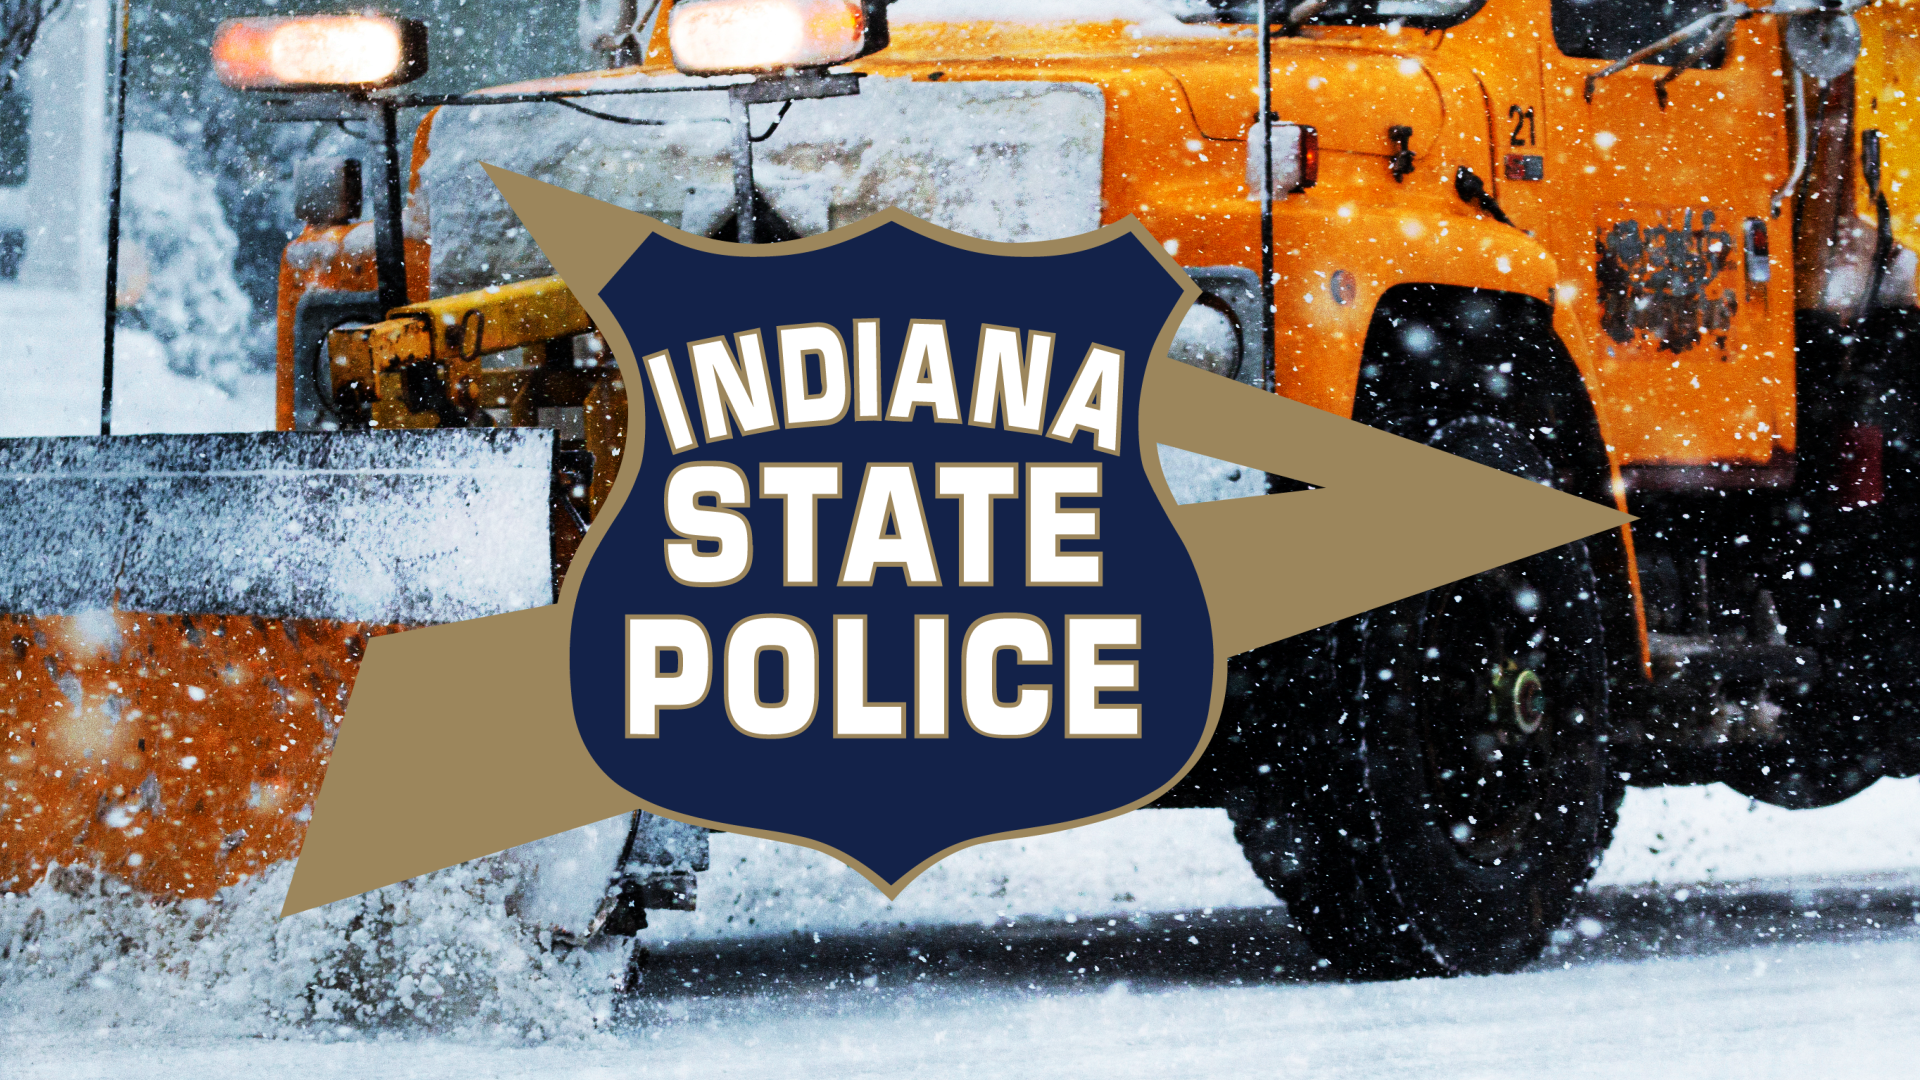 Indiana State Police respond to more than 100 crashes during recent snow storm